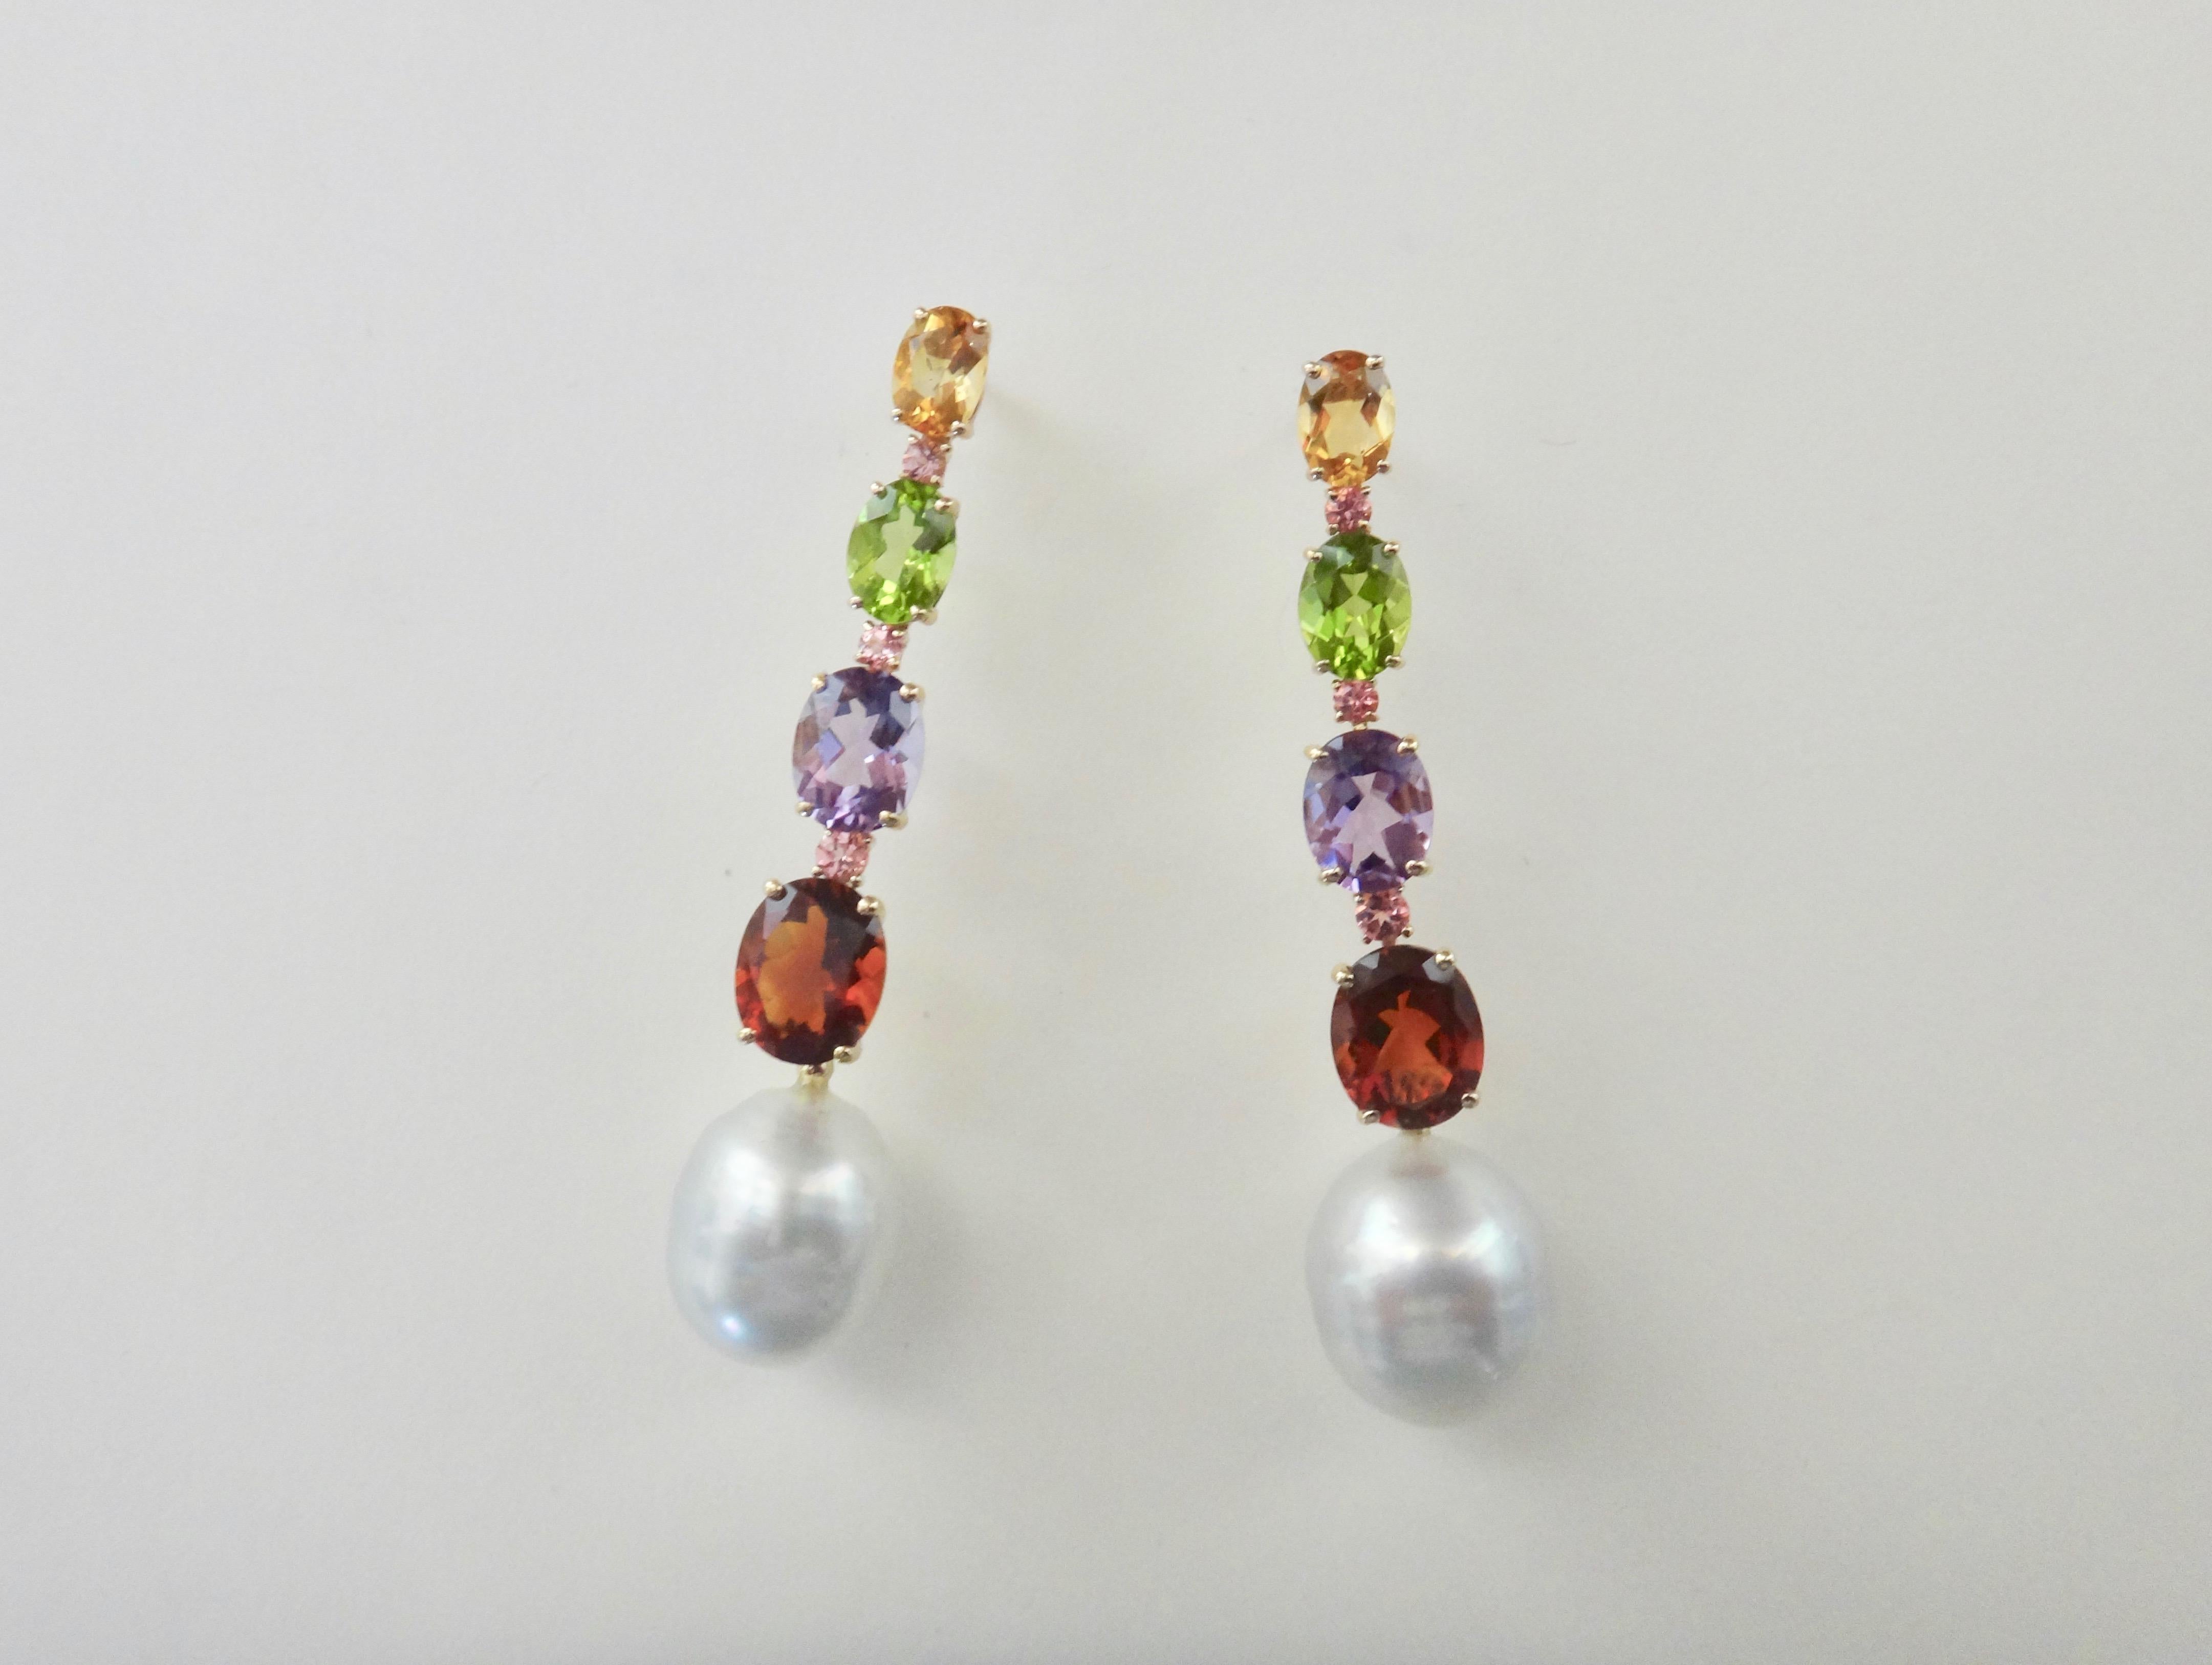 Citrine, peridot, amethyst and garnet are oval cut, graduated in size and spaced with round pink tourmalines in these delightful dangle earrings.  Completing the dangles are a pair of baroque, gem quality Paspaley South Seas pearls.  The mountings